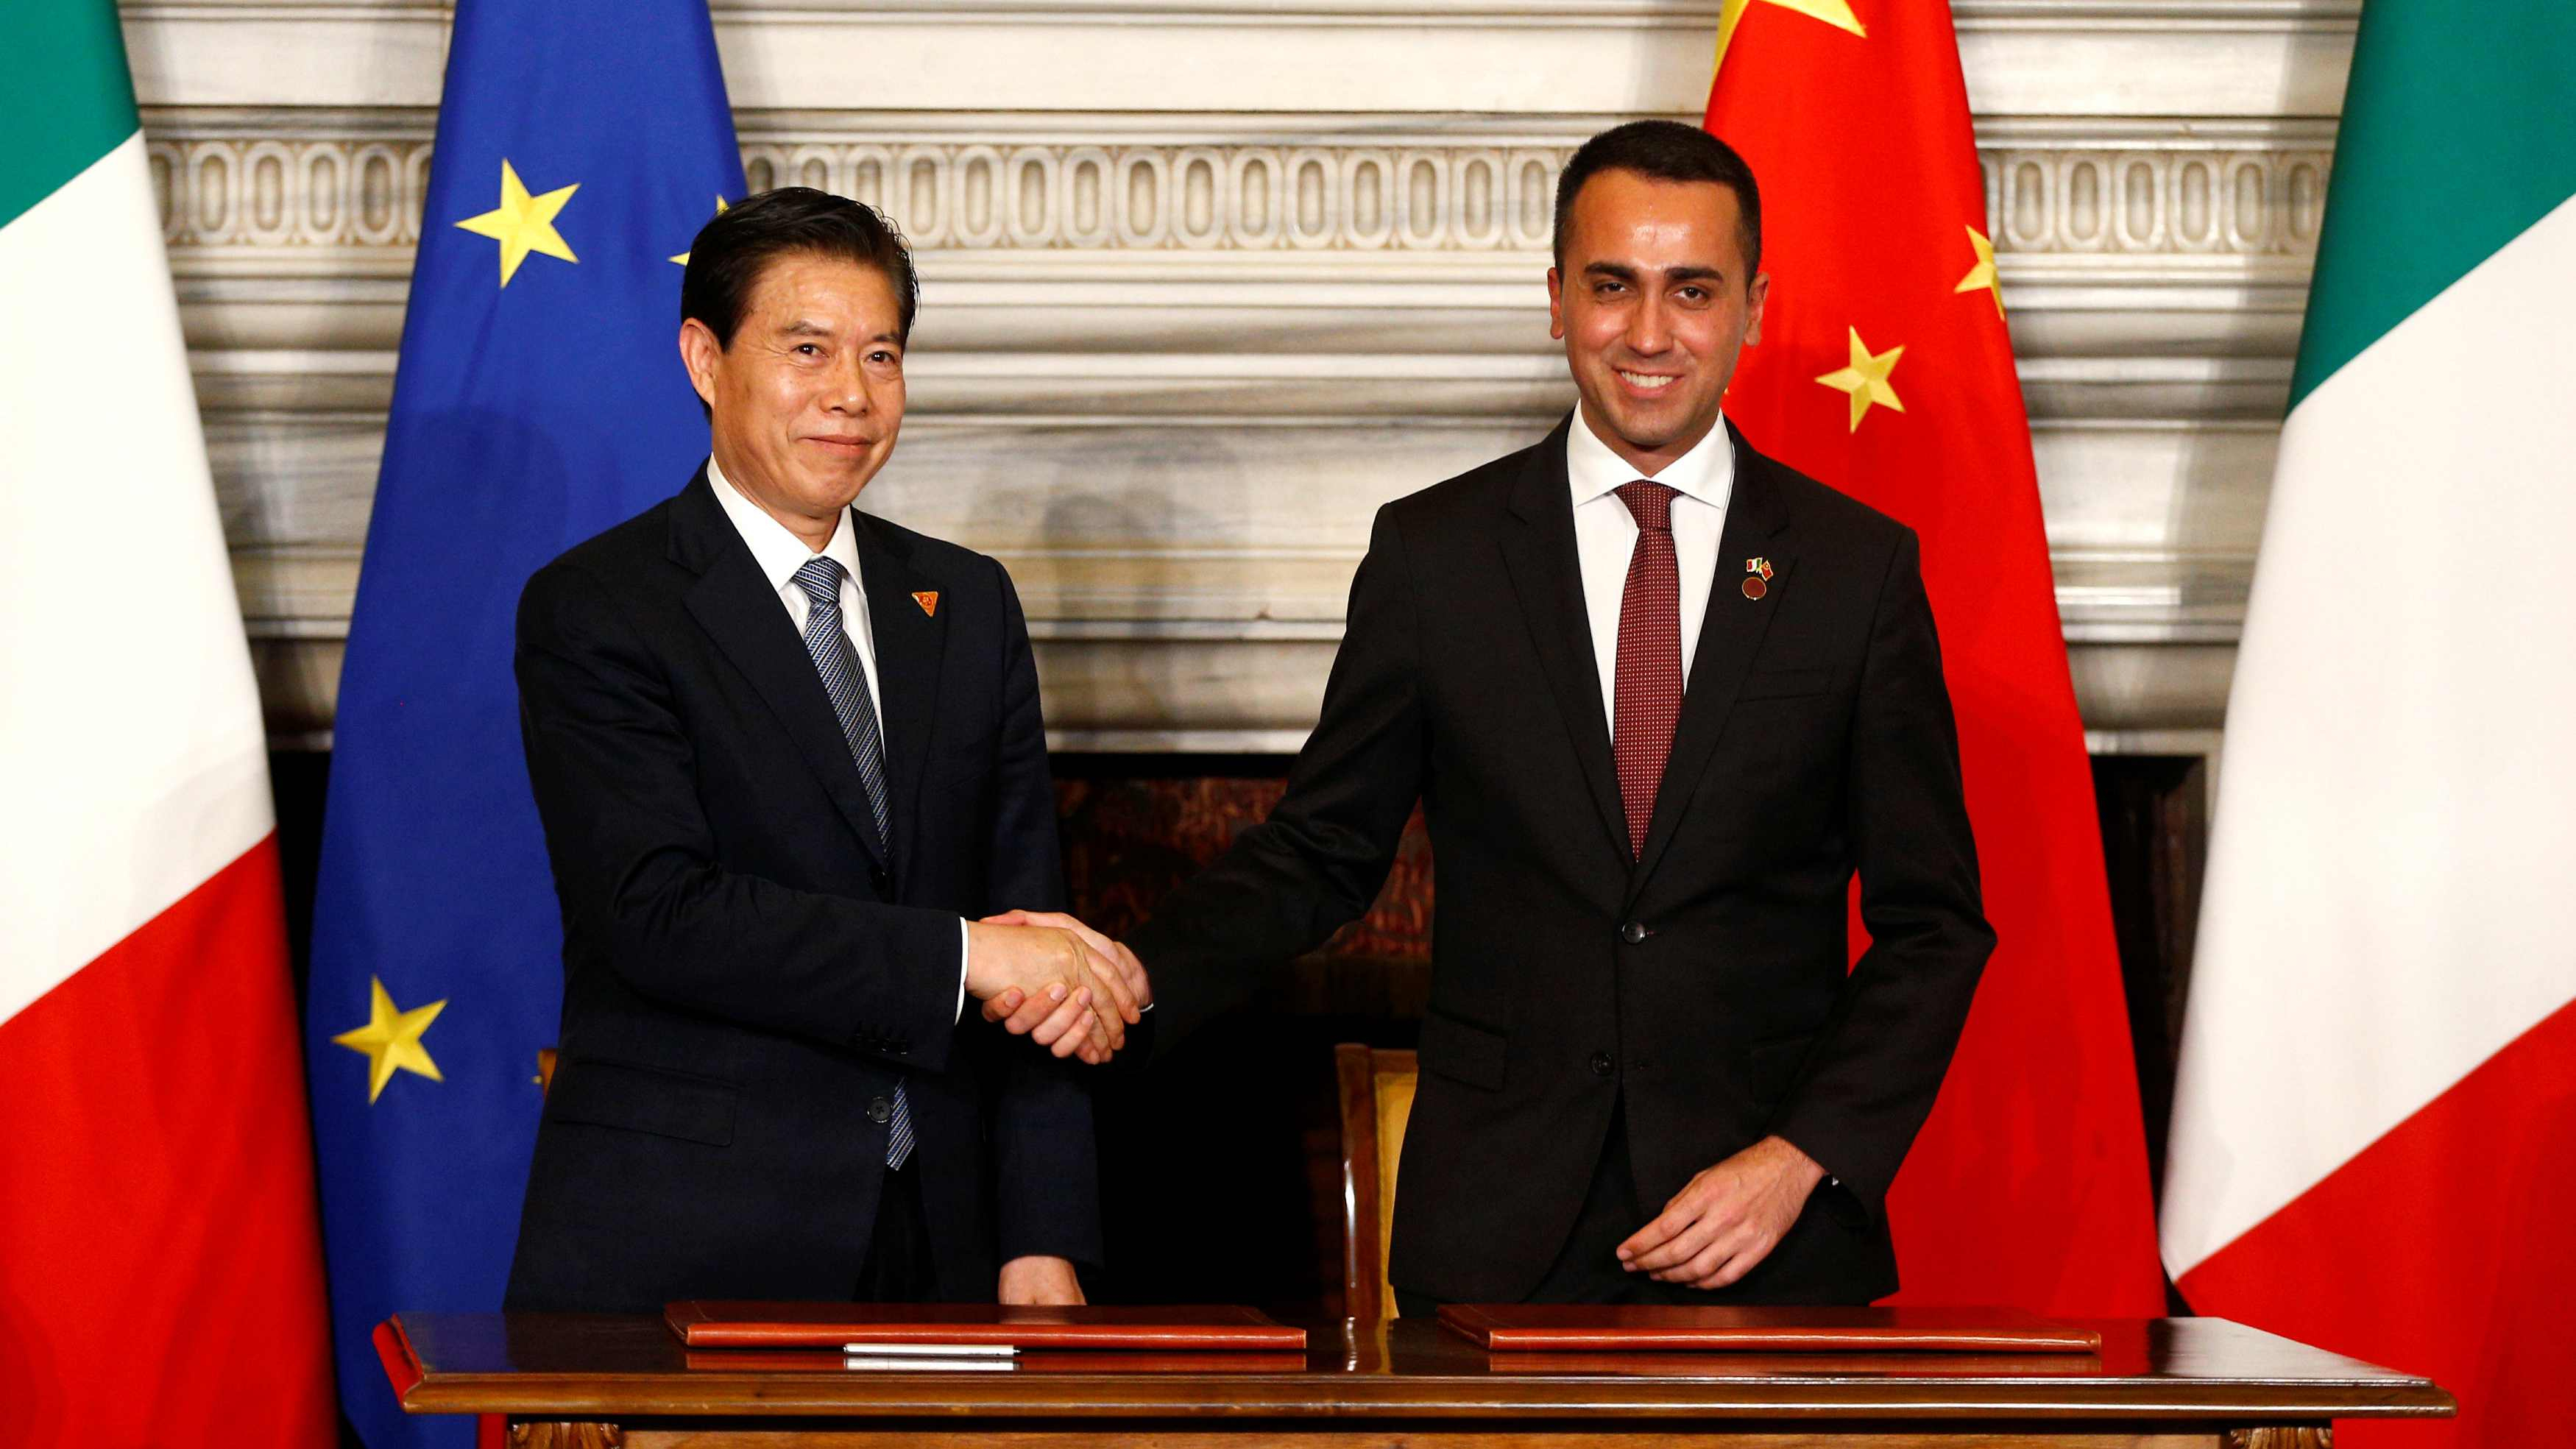 Chinese Commerce Minister Zhong Shan and Italian Minister of Labor and Industry Luigi Di Maio shake hands after signing trade agreements at Villa Madama in Rome, Italy, March 23, 2019. /Reuters